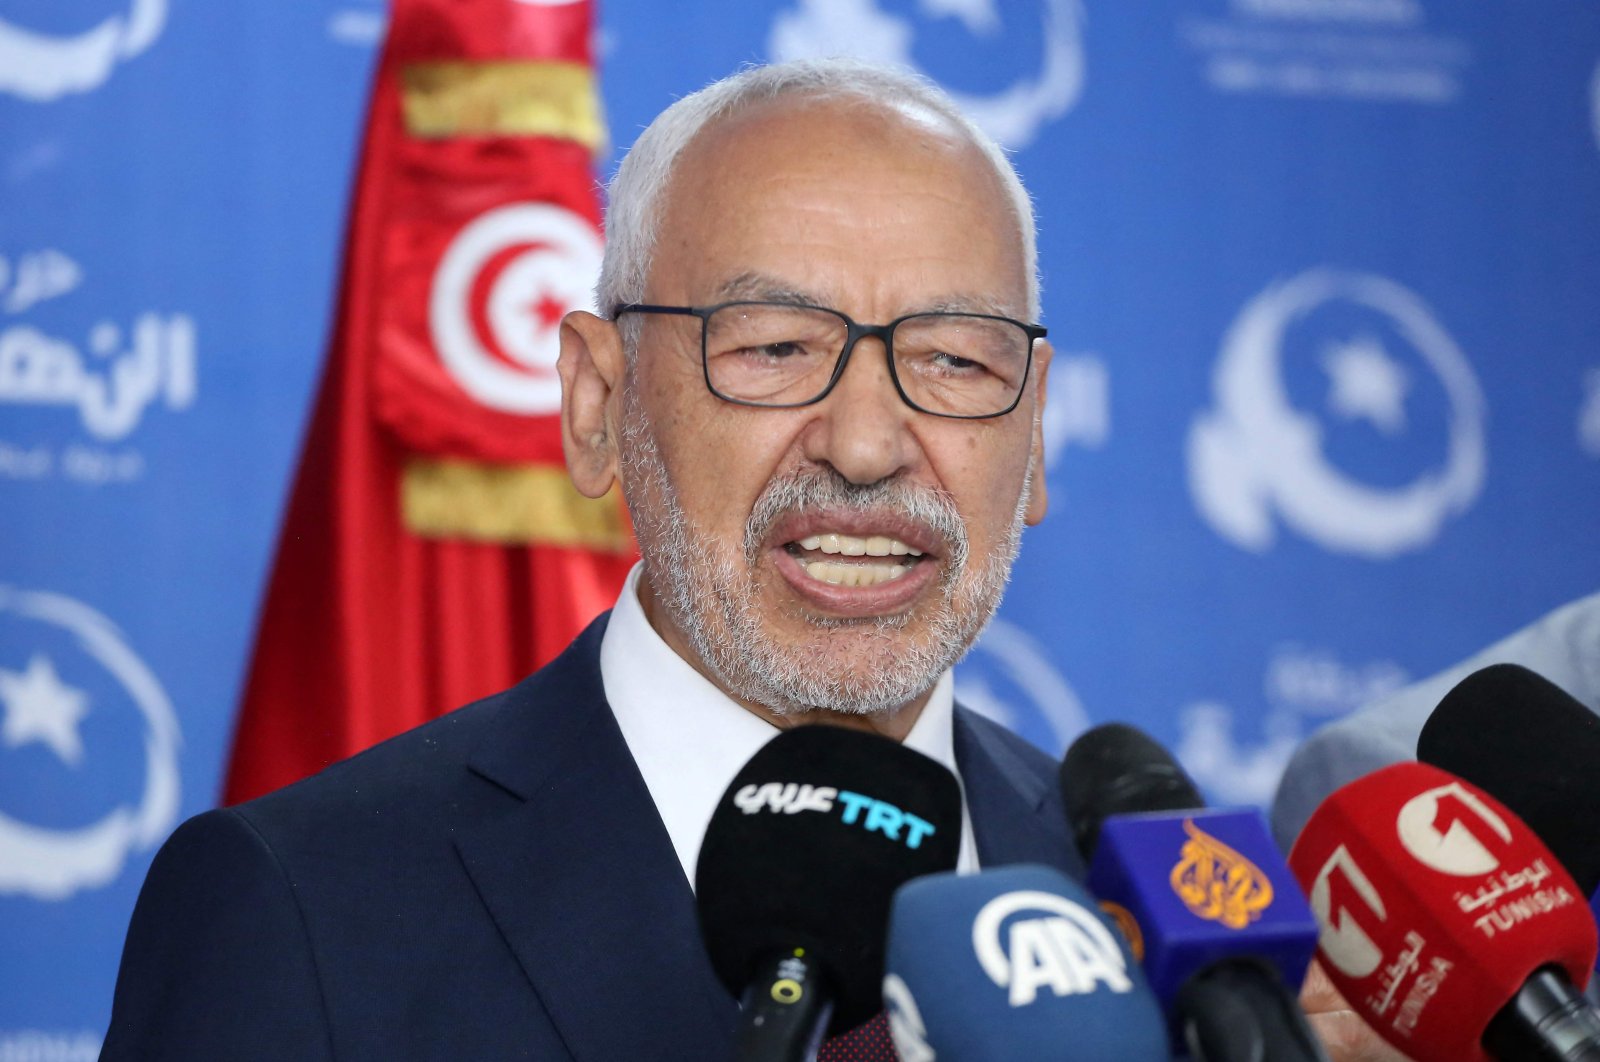 Tunisian Ennahdha party leader Rached Ghannouchi gives a press conference on Oct. 7, 2019, Tunis, Tunisia. (AFP Photo)